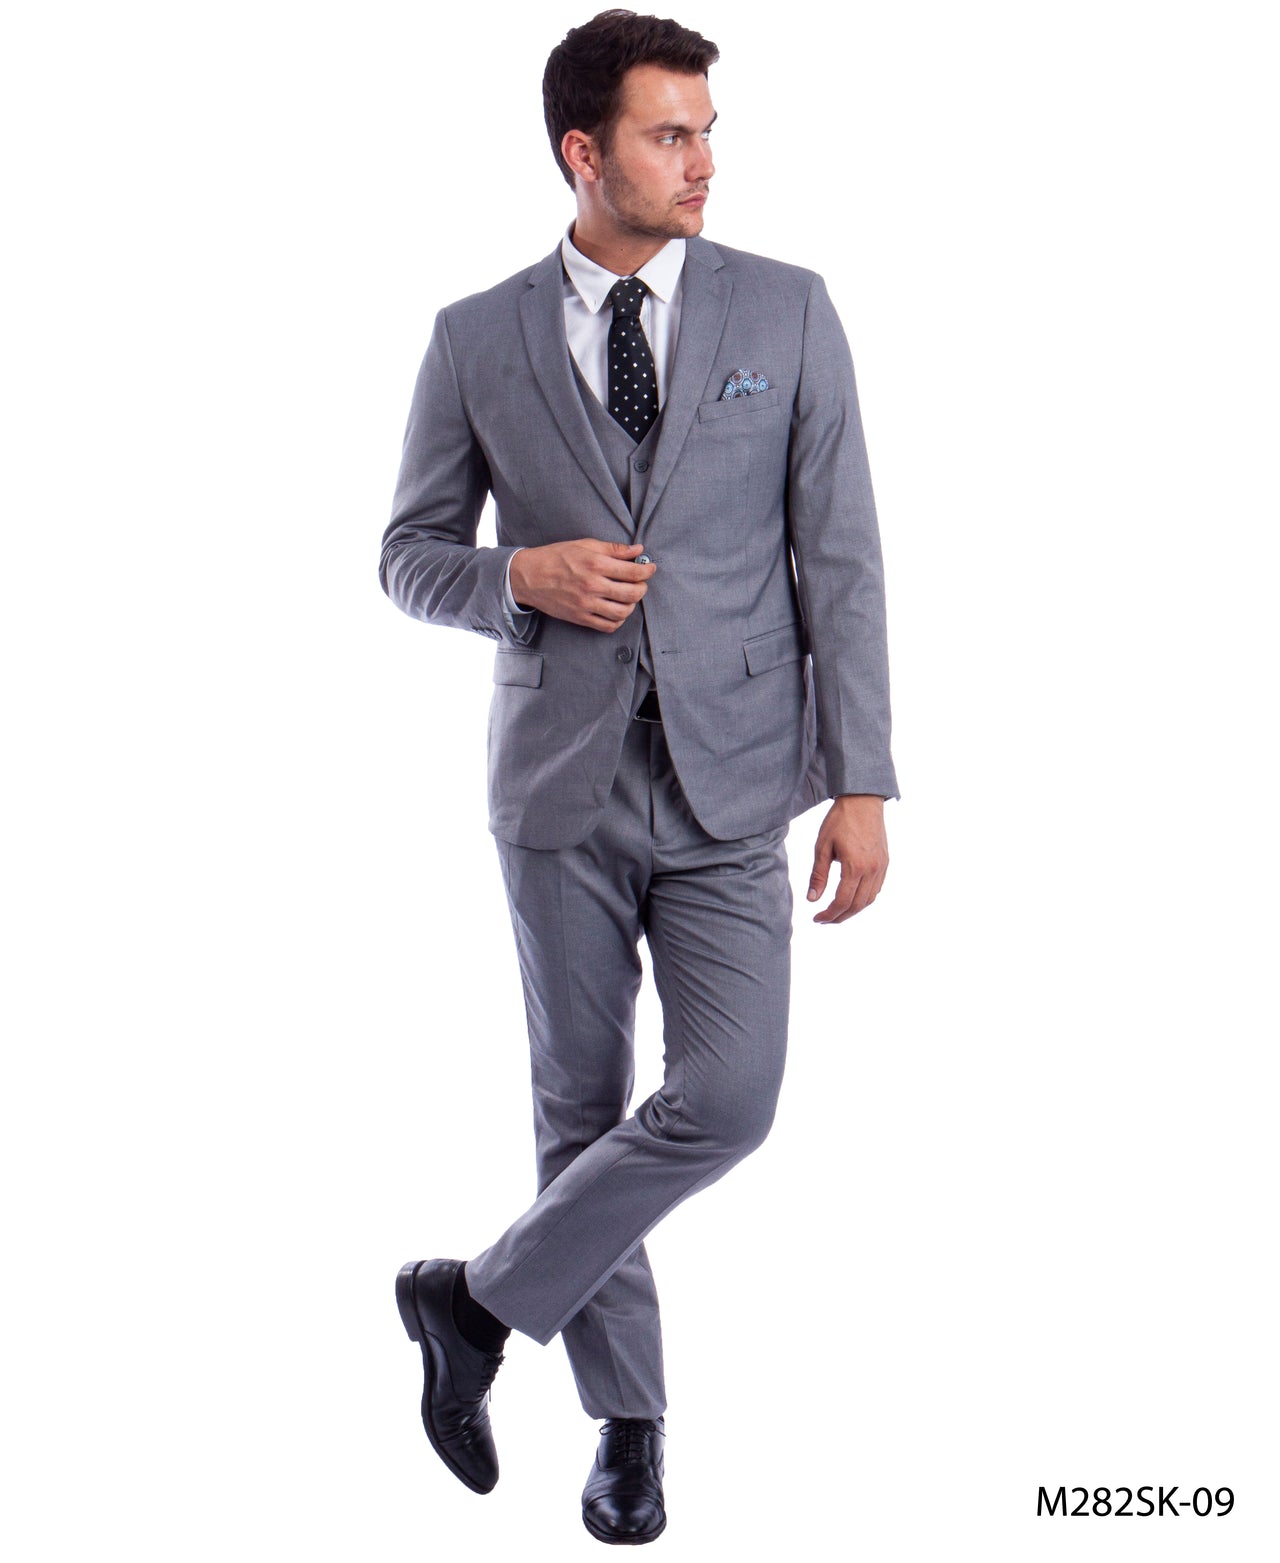 M.Gray Suit For Men Formal Suits For All Ocassions - Hattitude